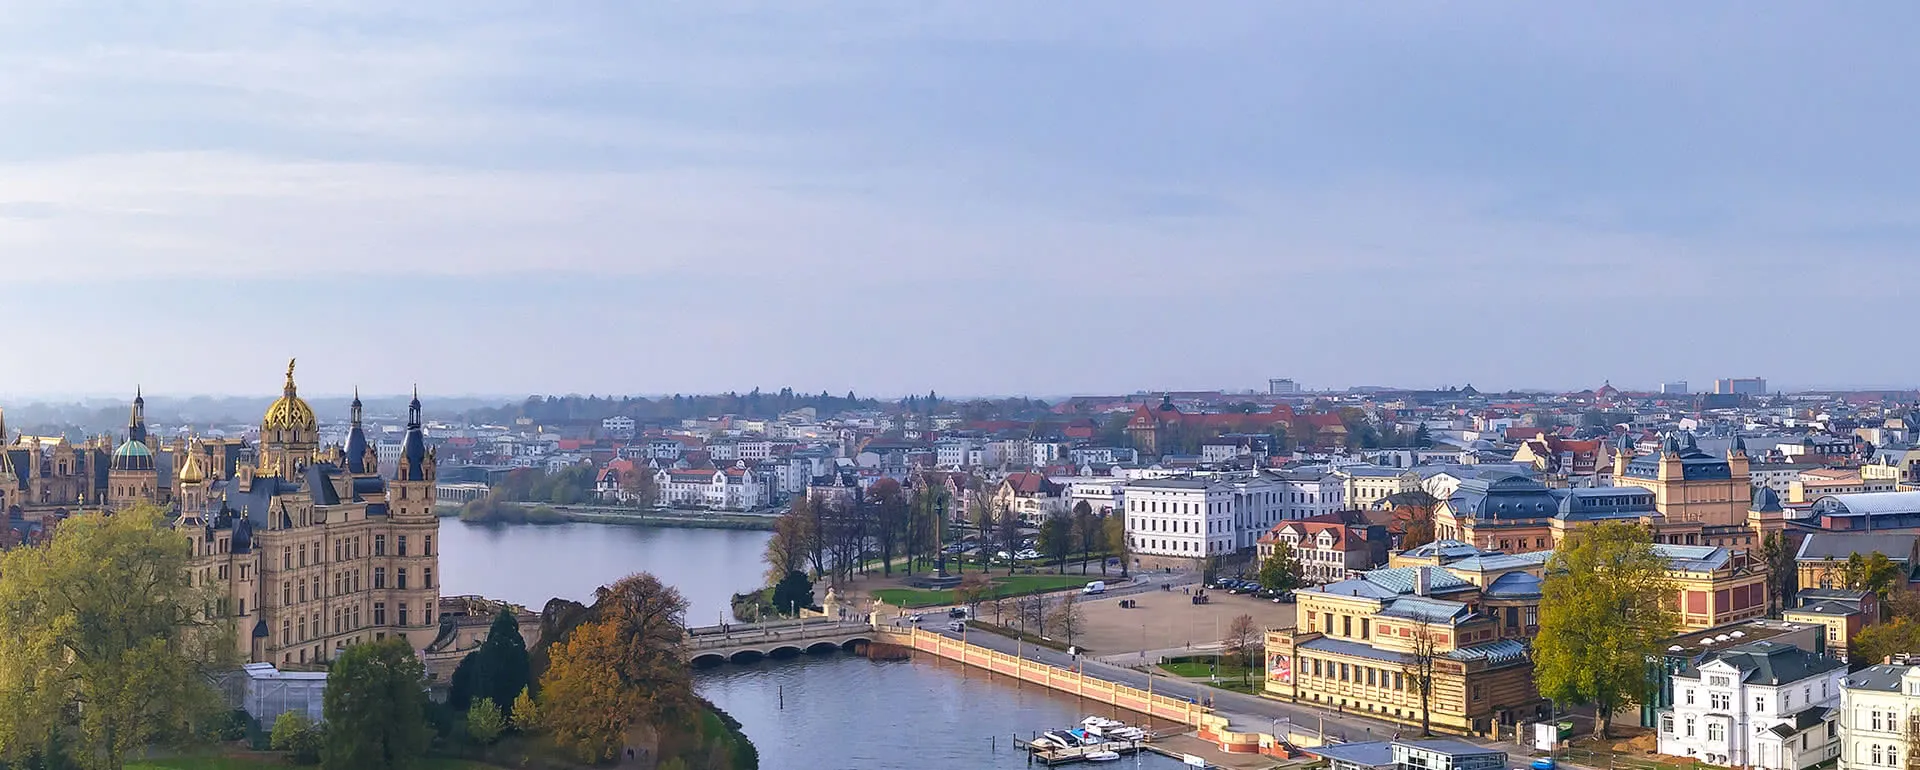 Schwerin - the destination for company trips